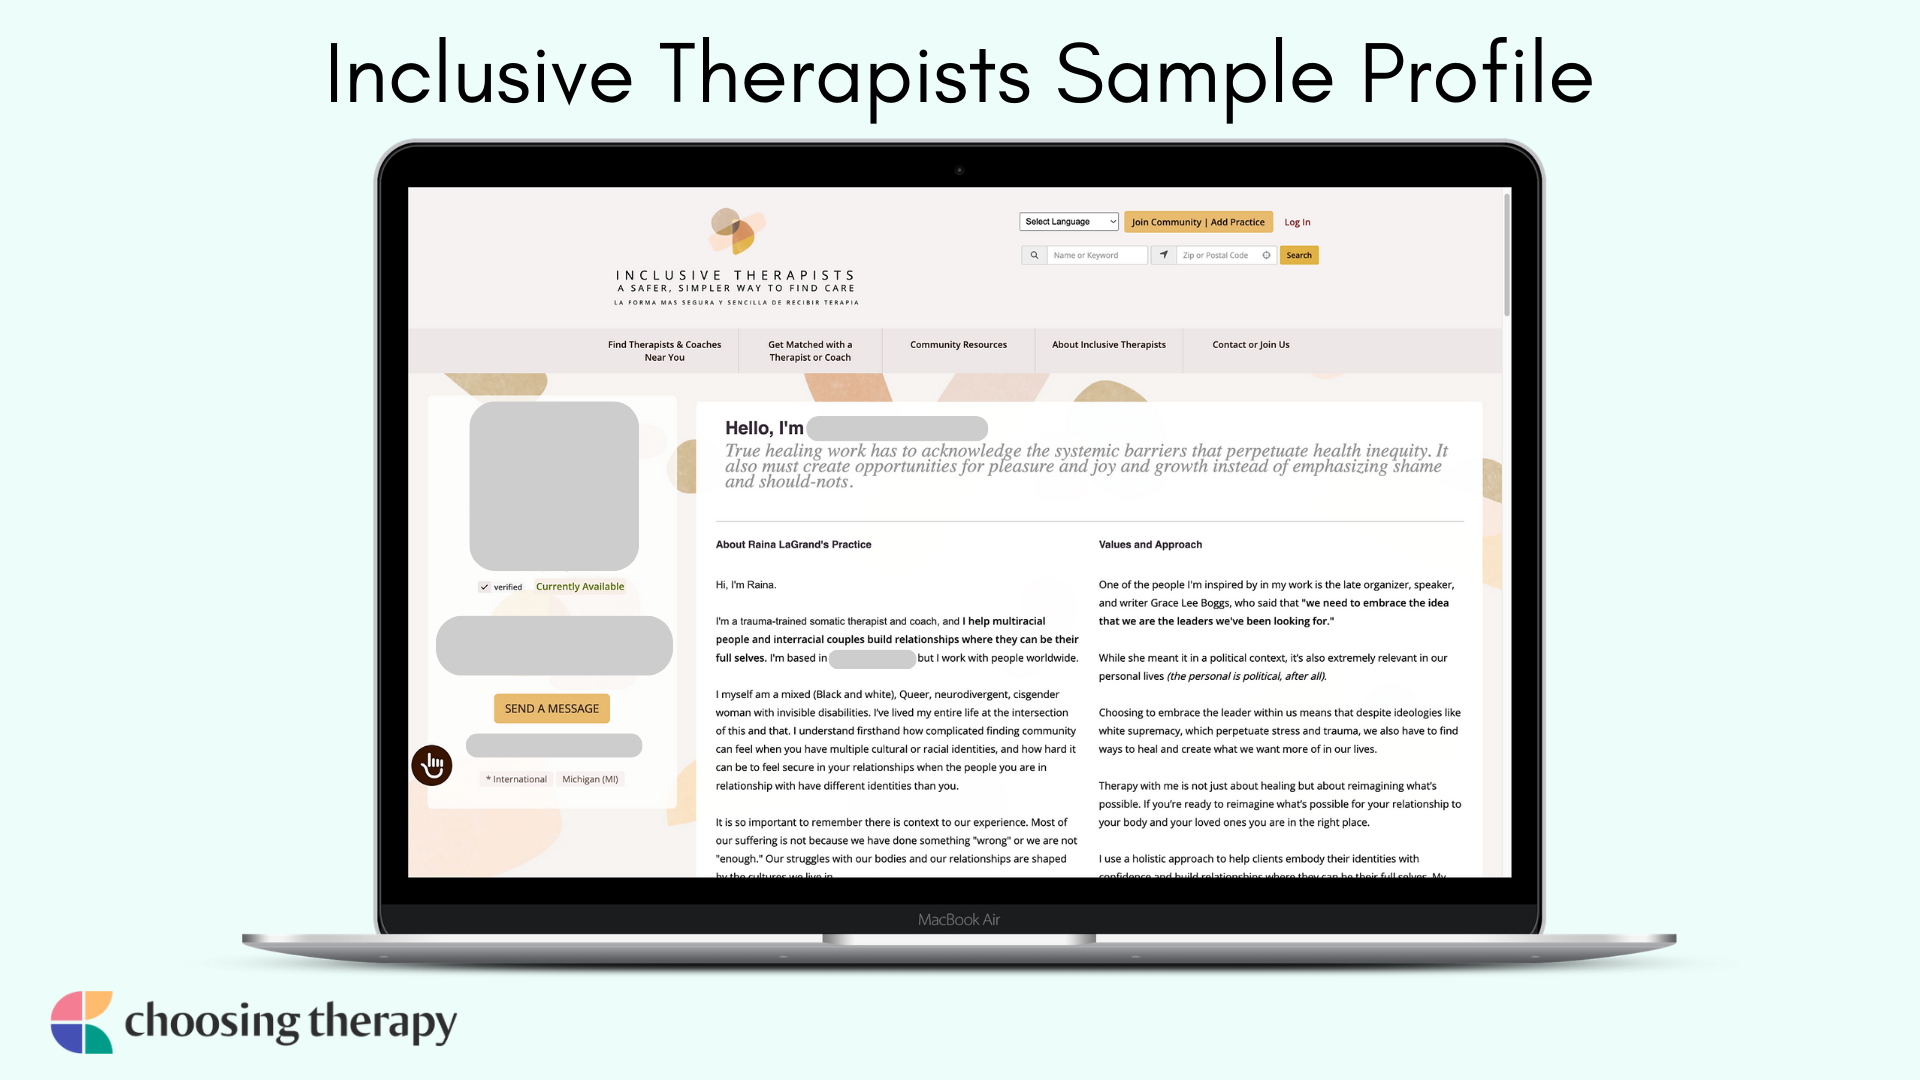 Inclusive-Therapists-Review_-Image-of-a-sample-profile-in-Inclusive-Therapists